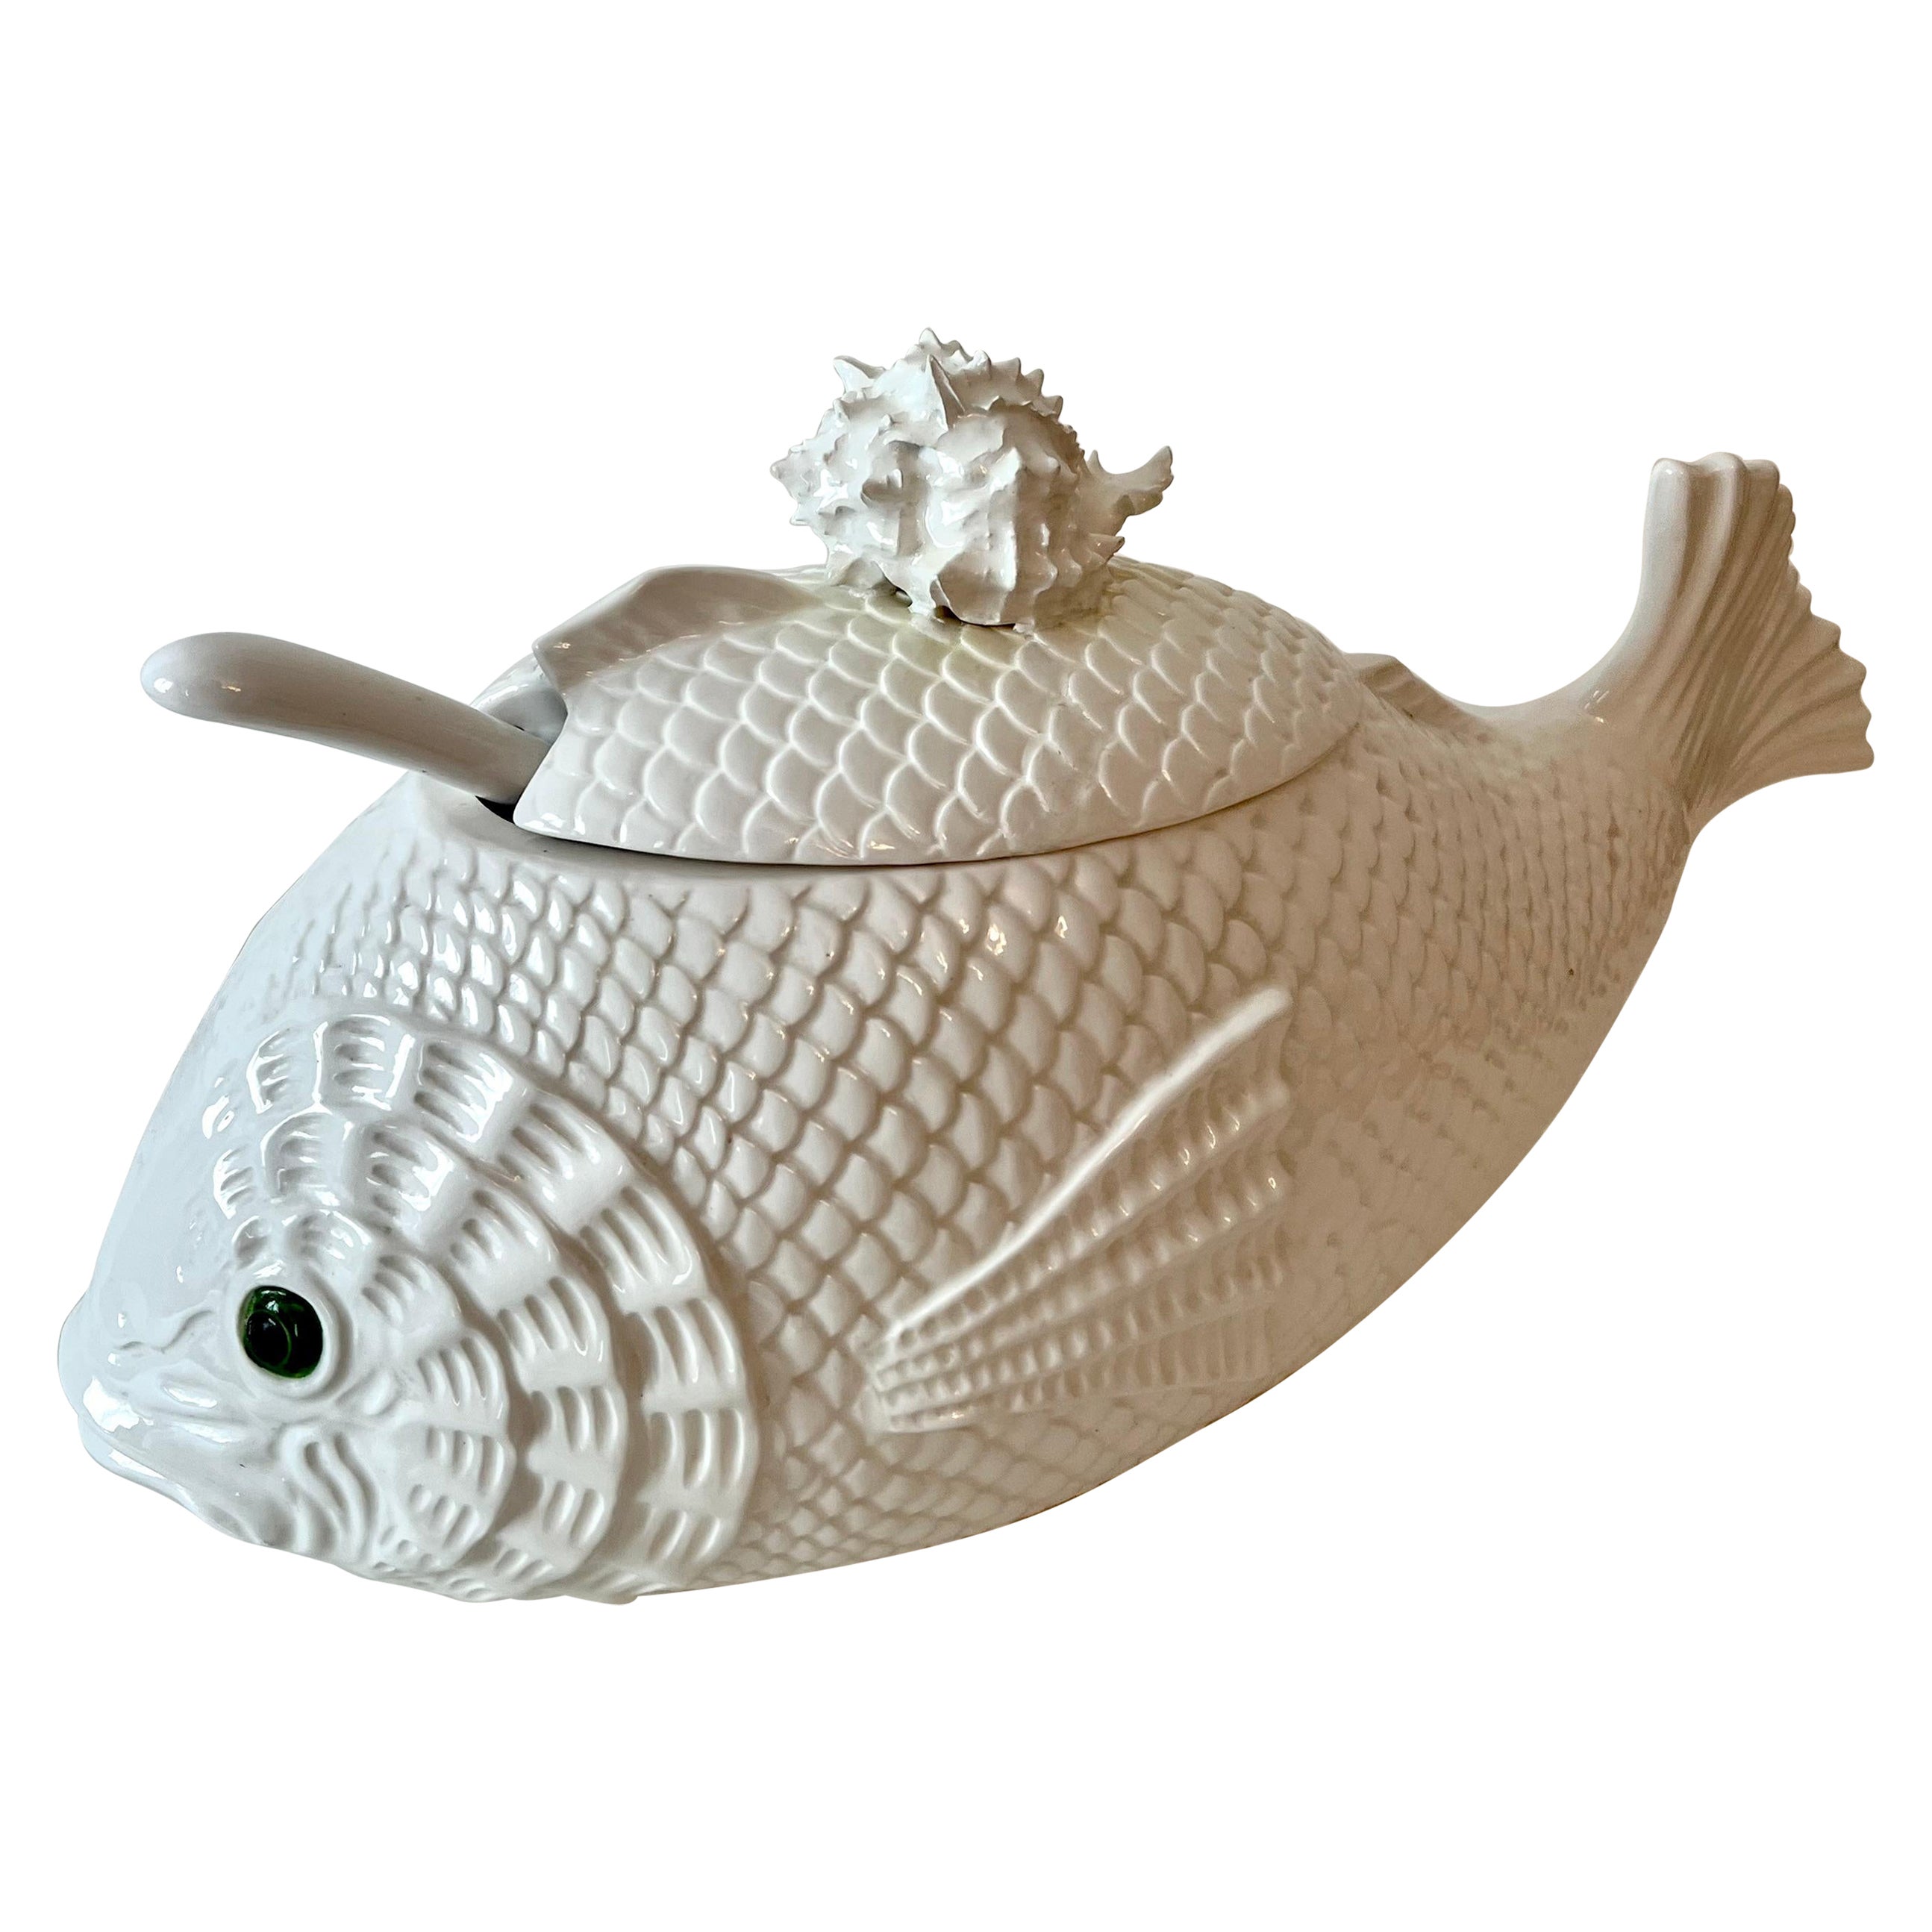 Fitz and Floyd Fish Soup Tureen with Lid and Ladle For Sale